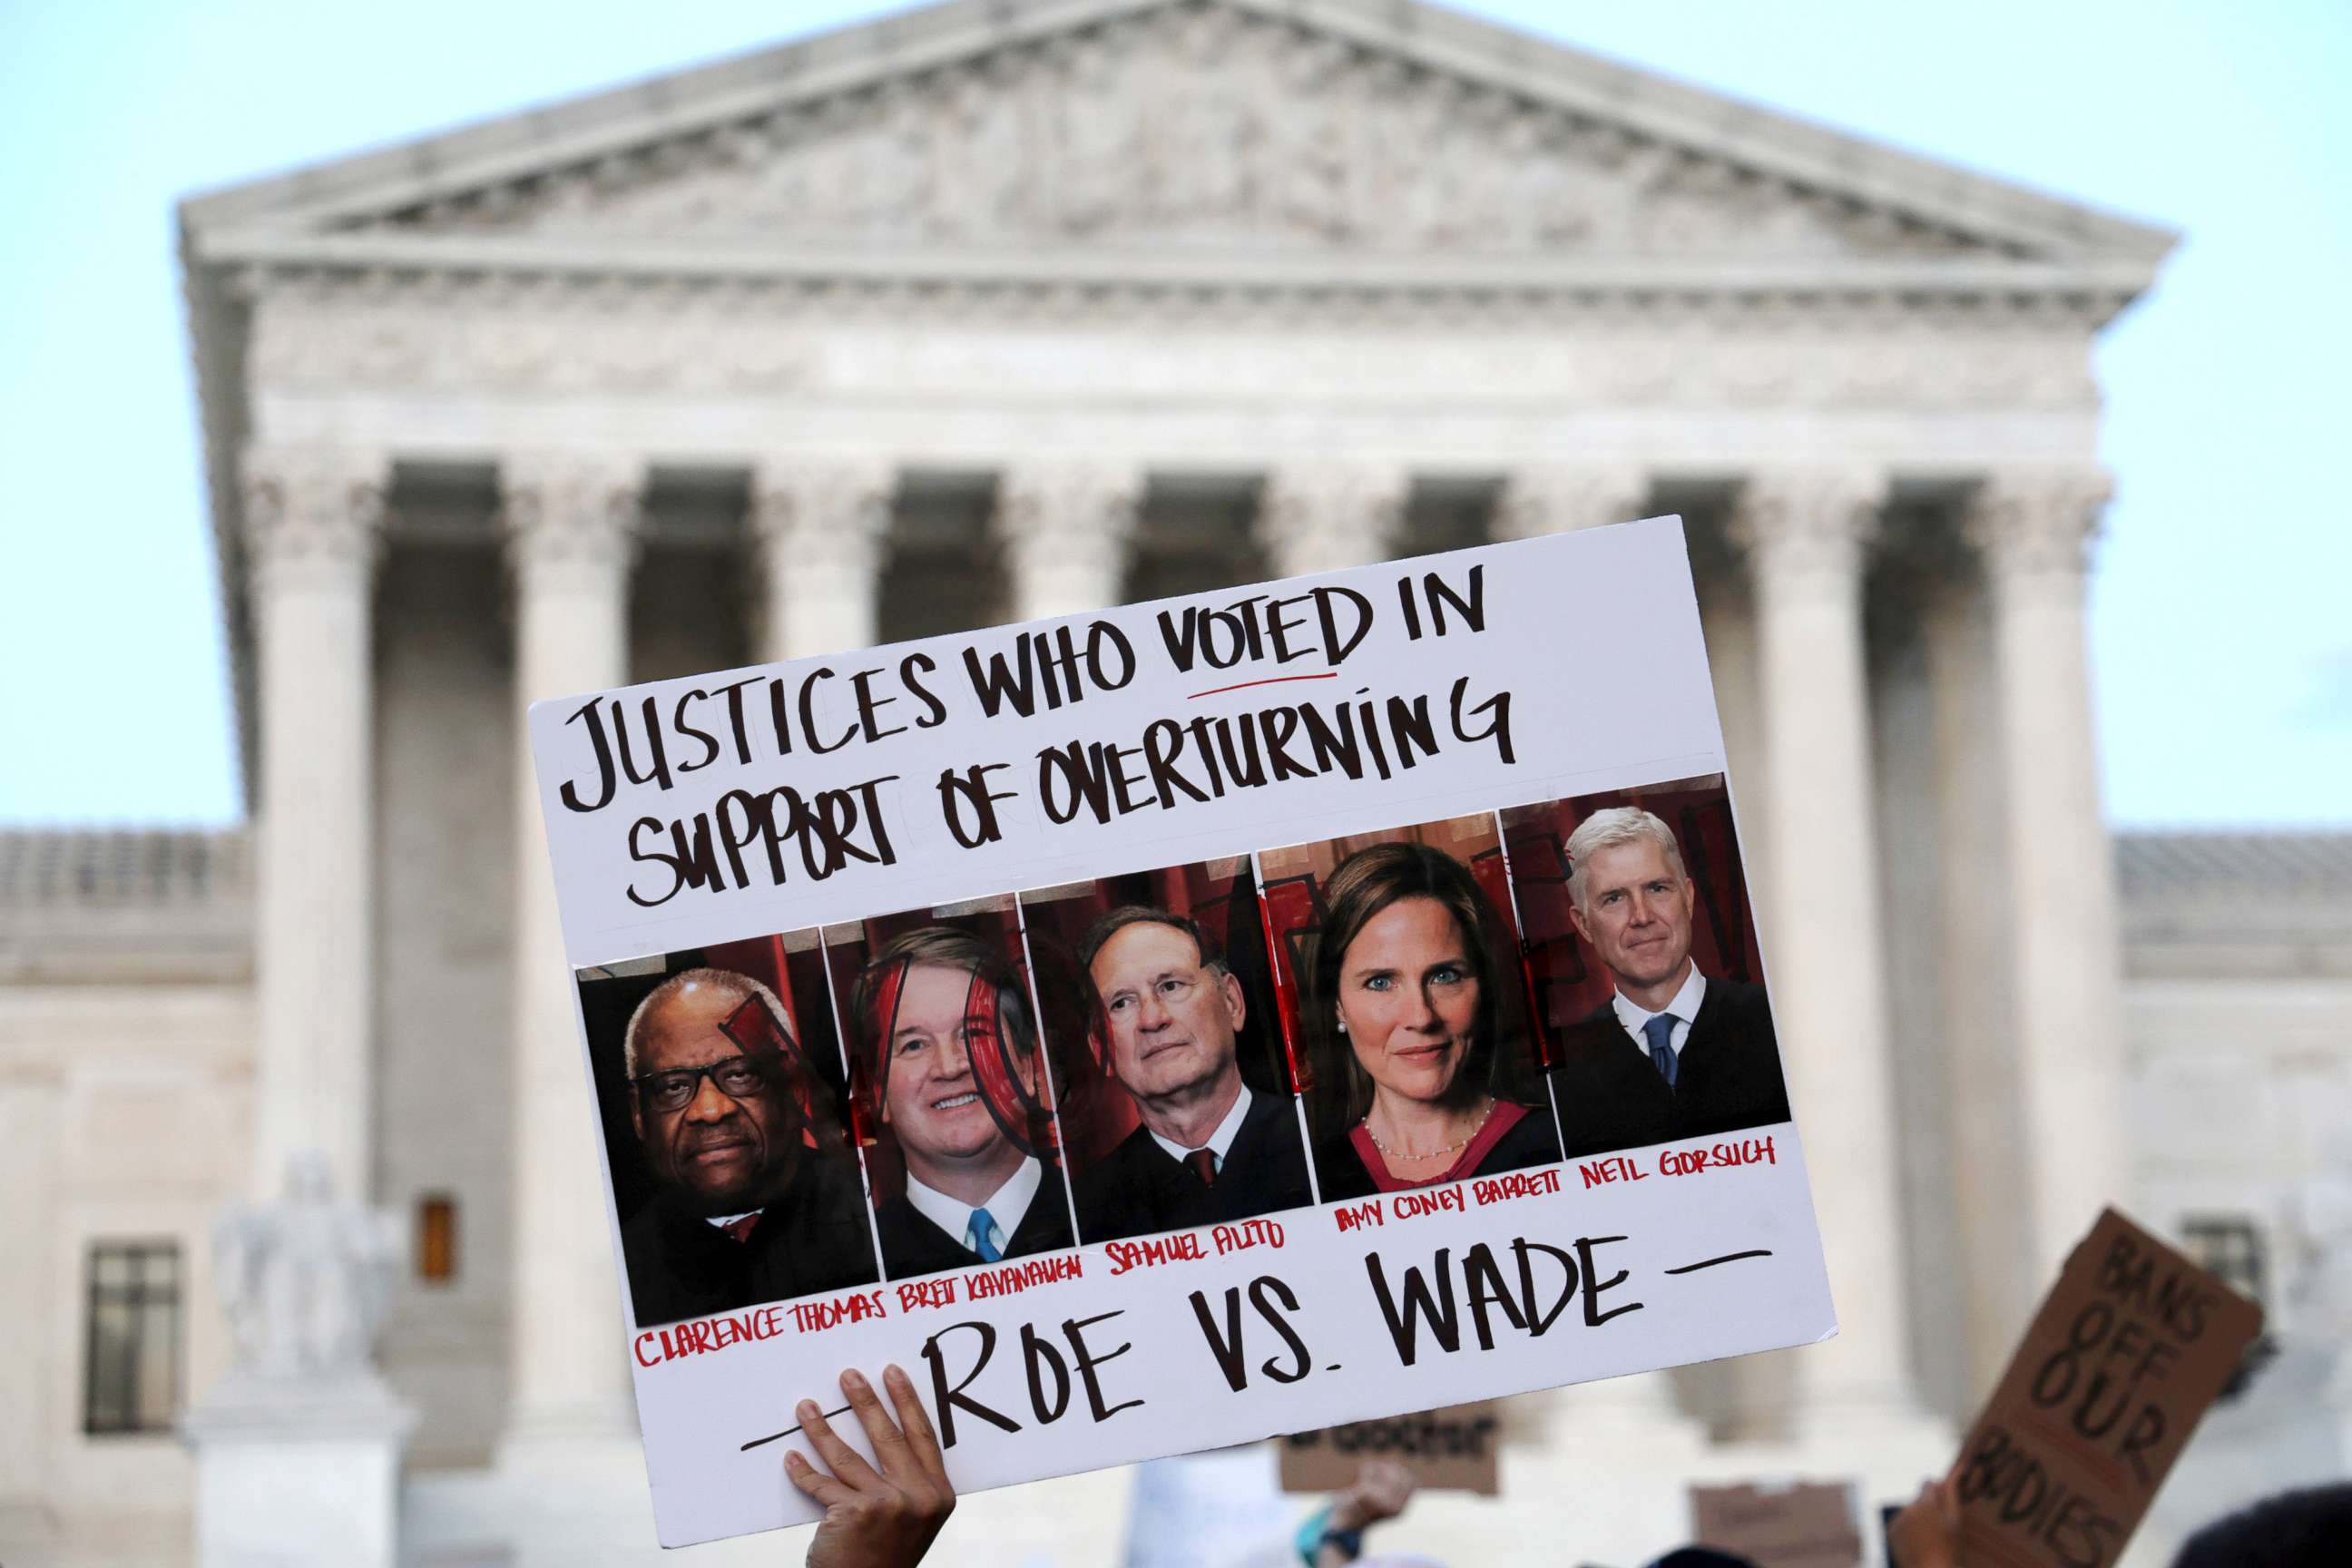 PHOTO: A pro-choice activist holds up a sign during a rally in front of the U.S. Supreme Court in response to the leaked Supreme Court draft decision to overturn Roe v. Wade May 3, 2022 in Washington, D.C.